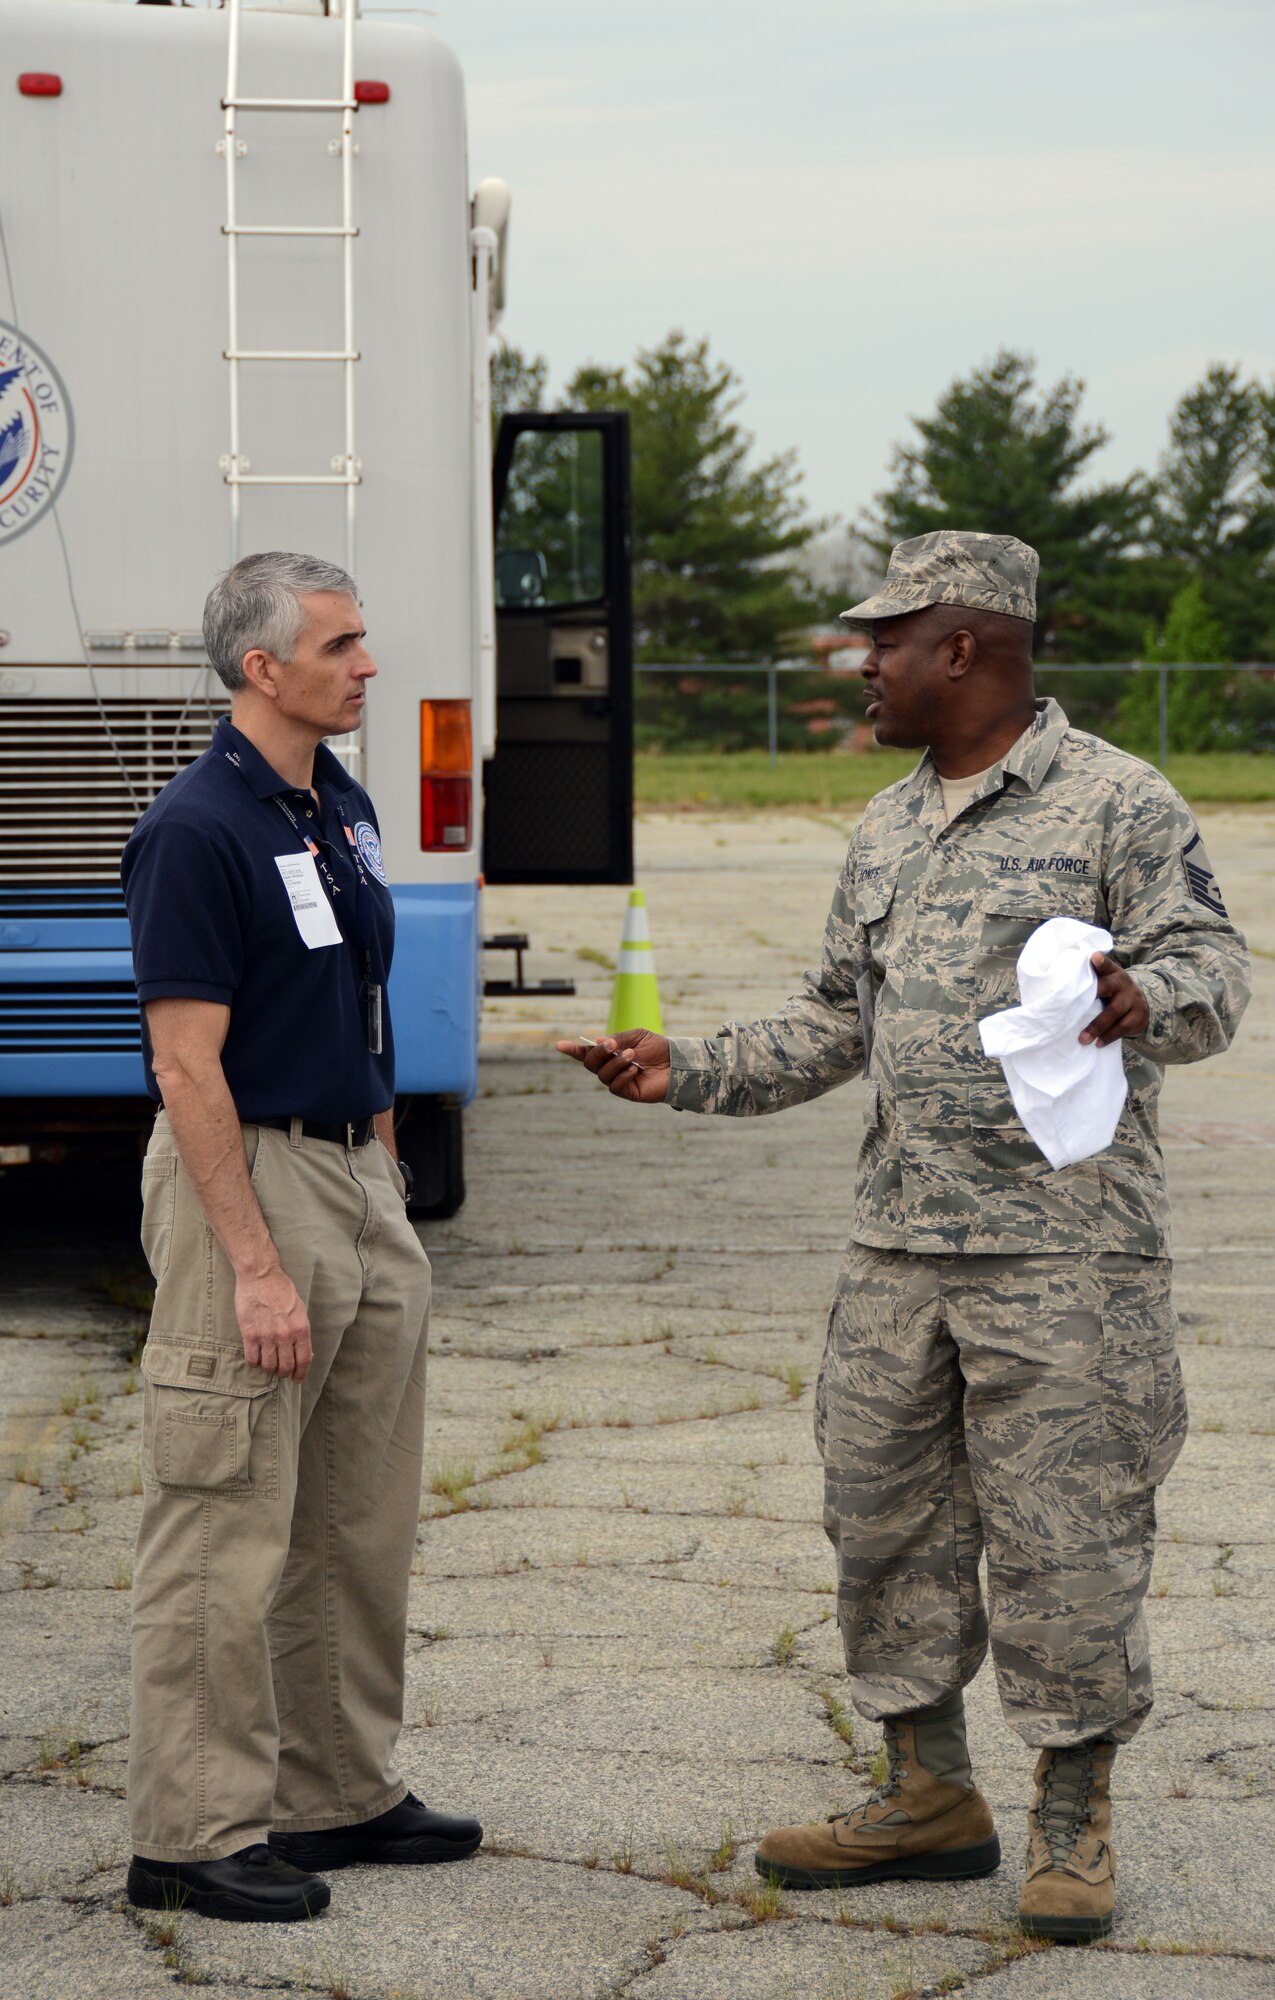 U.S. Air Force Master Sgt. Timothy Jones, Superintendent of Operations for the 156th Aeromedical Evacuation Squadron, meets with Robert Nicholson, Jones civilian counterpart with the Transportation Security Administration, during a North Carolina Command and Communications rally held in Greensboro, N.C. April 10, 2015. NCANG partnered with more than twenty Emergency Management agencies and provided a Mobile Emergency Operations Center to test communications during a natural disaster exercise. The Rally allowed for North Carolina Emergency Management agencies to connect, and understand the assets available for any state or possibly national incidents and disasters that may occur. (U.S. Air National Guard photo by Senior Airman Laura Montgomery, 145th Public Affairs/Released)